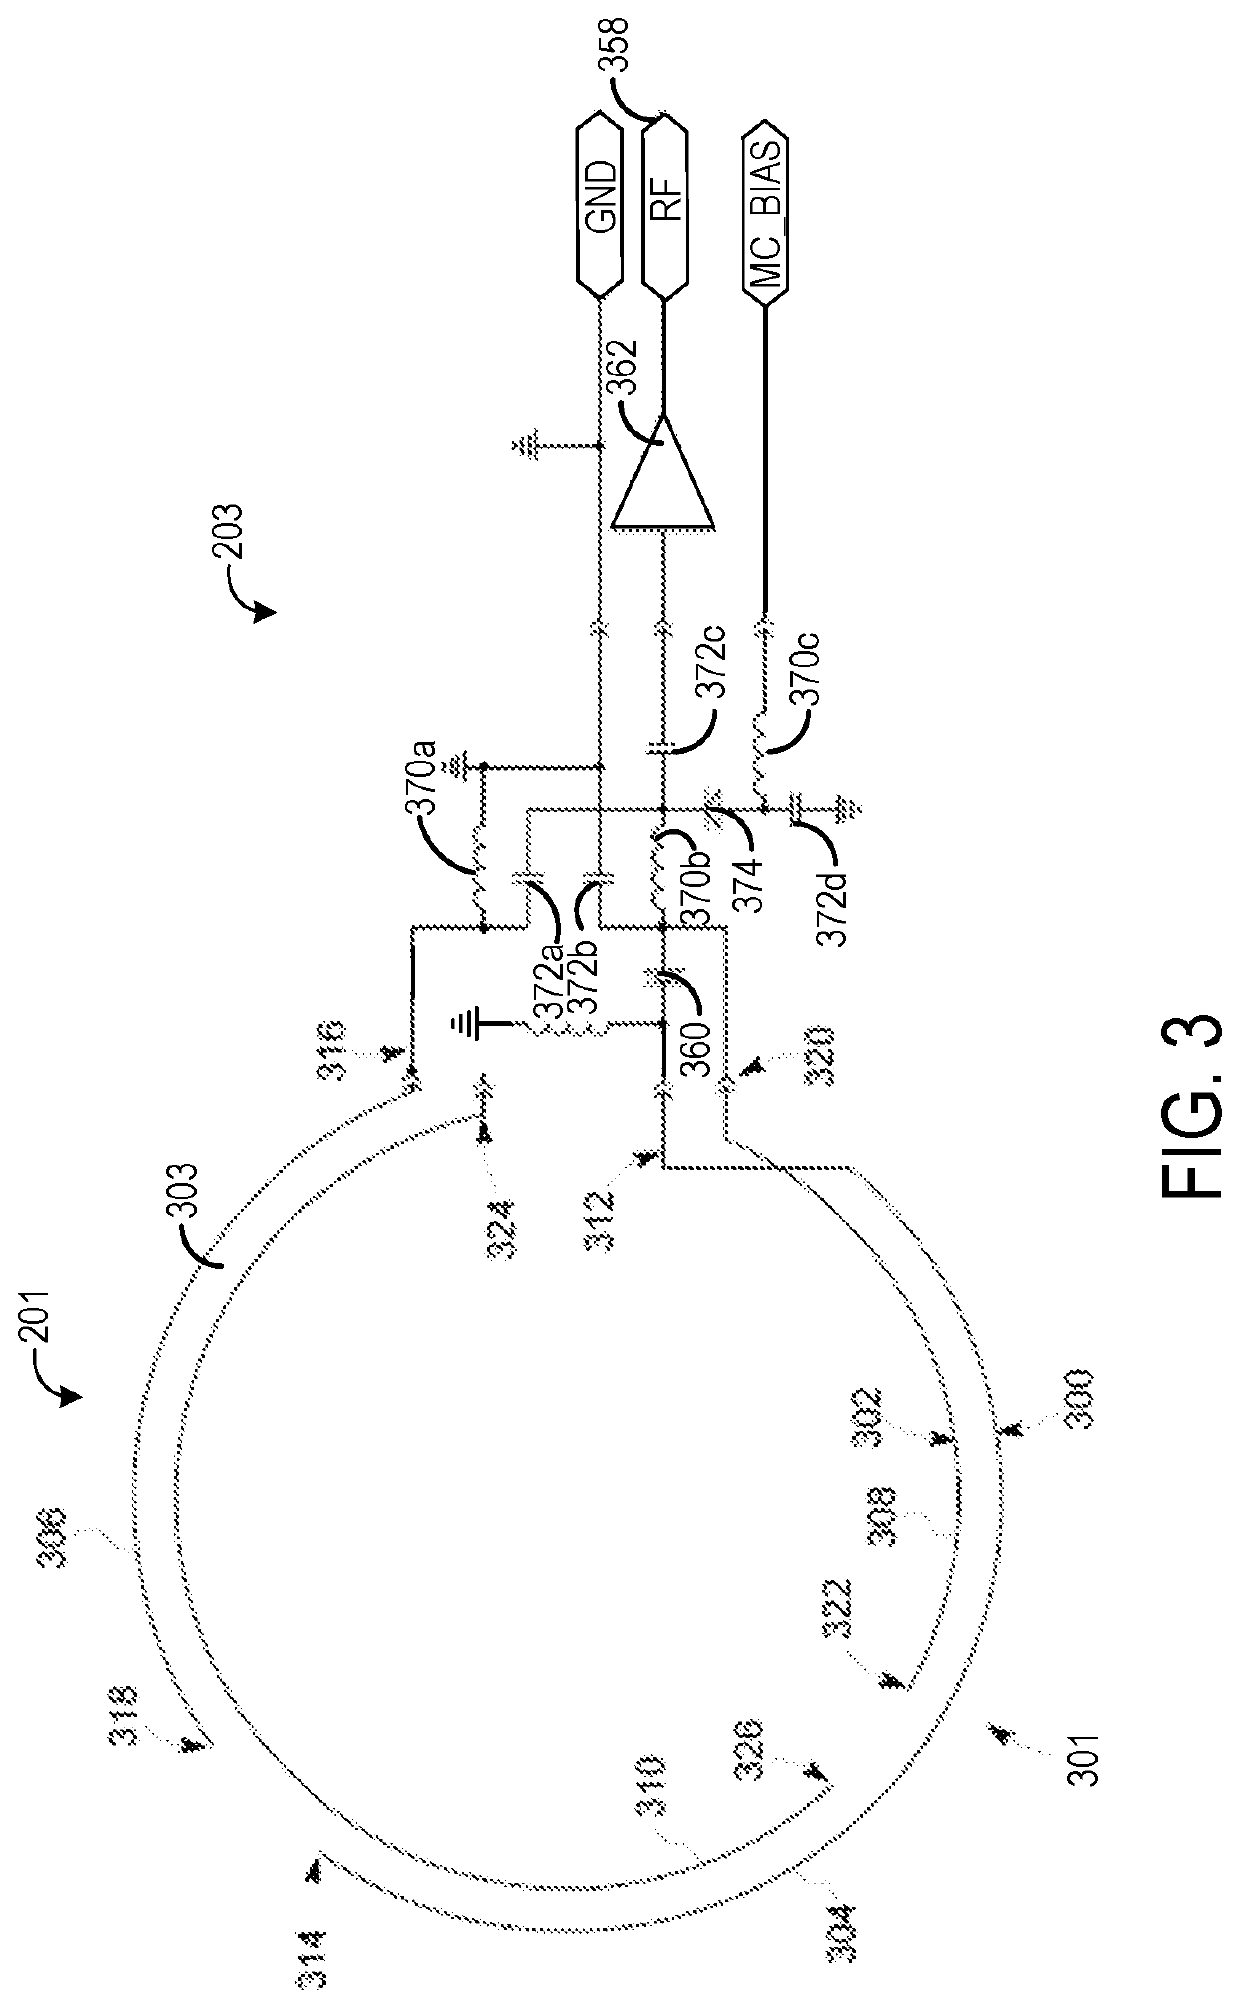 Systems for a radio frequency coil for MR imaging